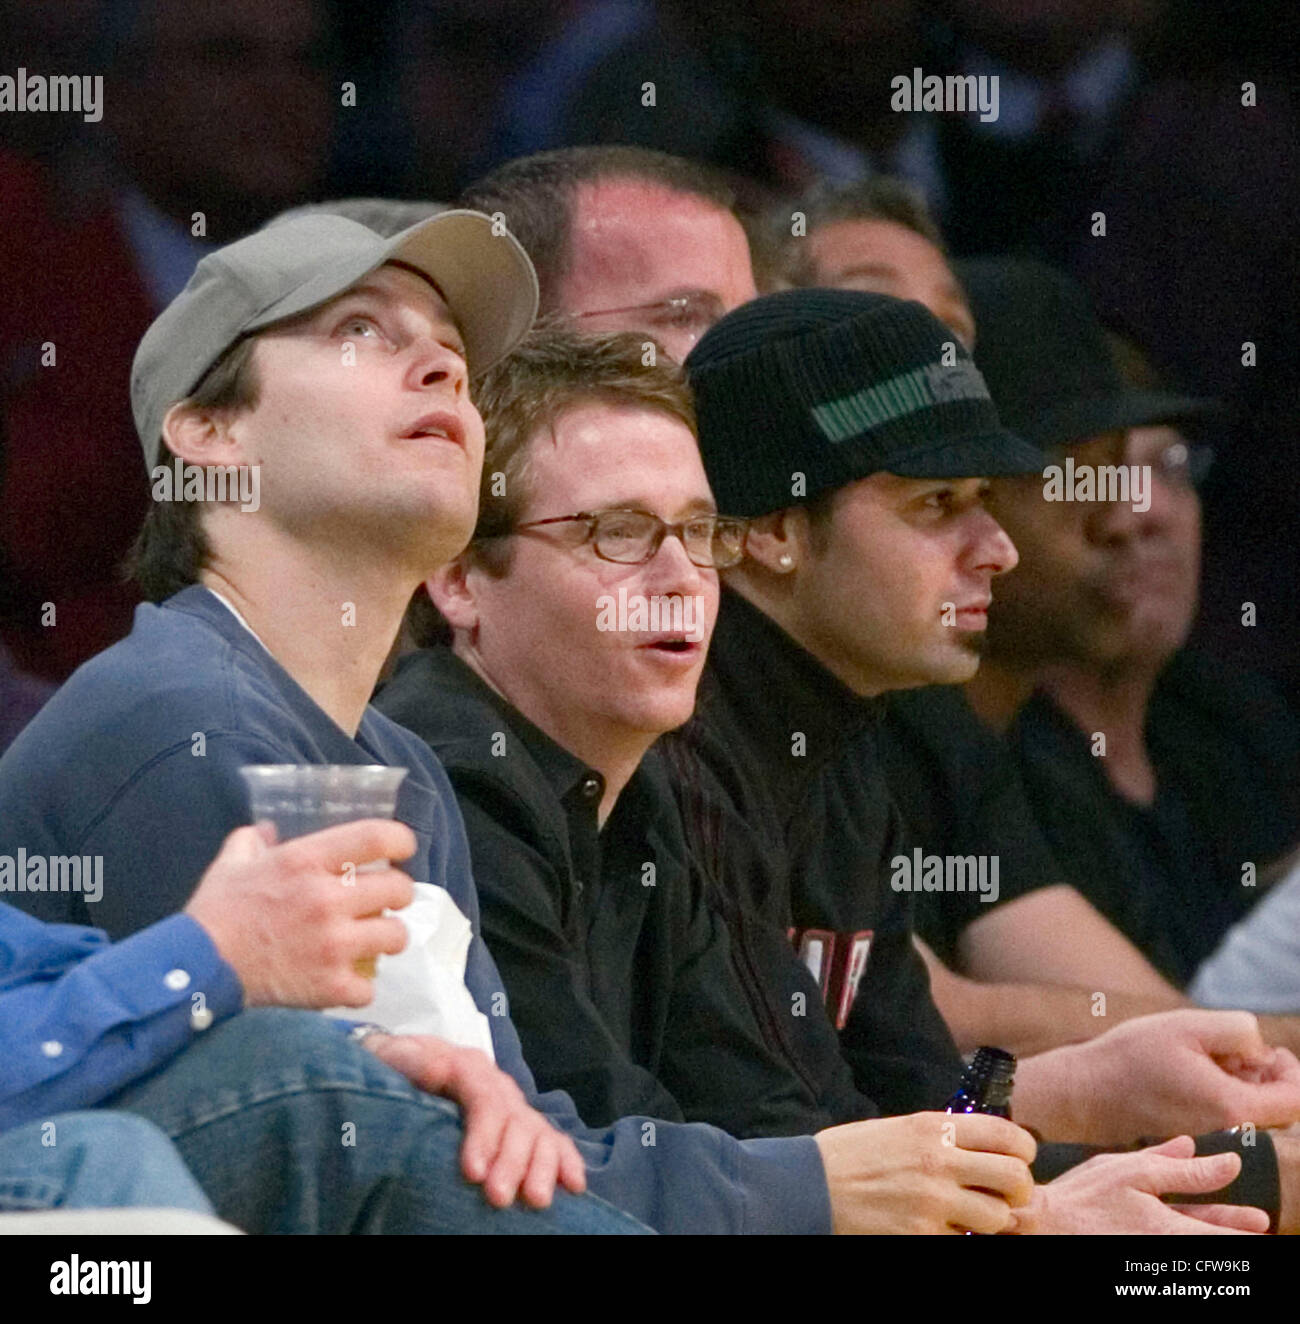 Feb 13, 2007 - Los Angeles, CA, USA - (L-R) Actors TOBEY MAGUIRE and KEVIN CONNOLLY watch the New York Knicks take on the Los Angeles Lakers at Staples Center. The New York Knicks won the game 107 to 106. (Credit Image: © Armando Arorizo/ZUMA Press) Stock Photo